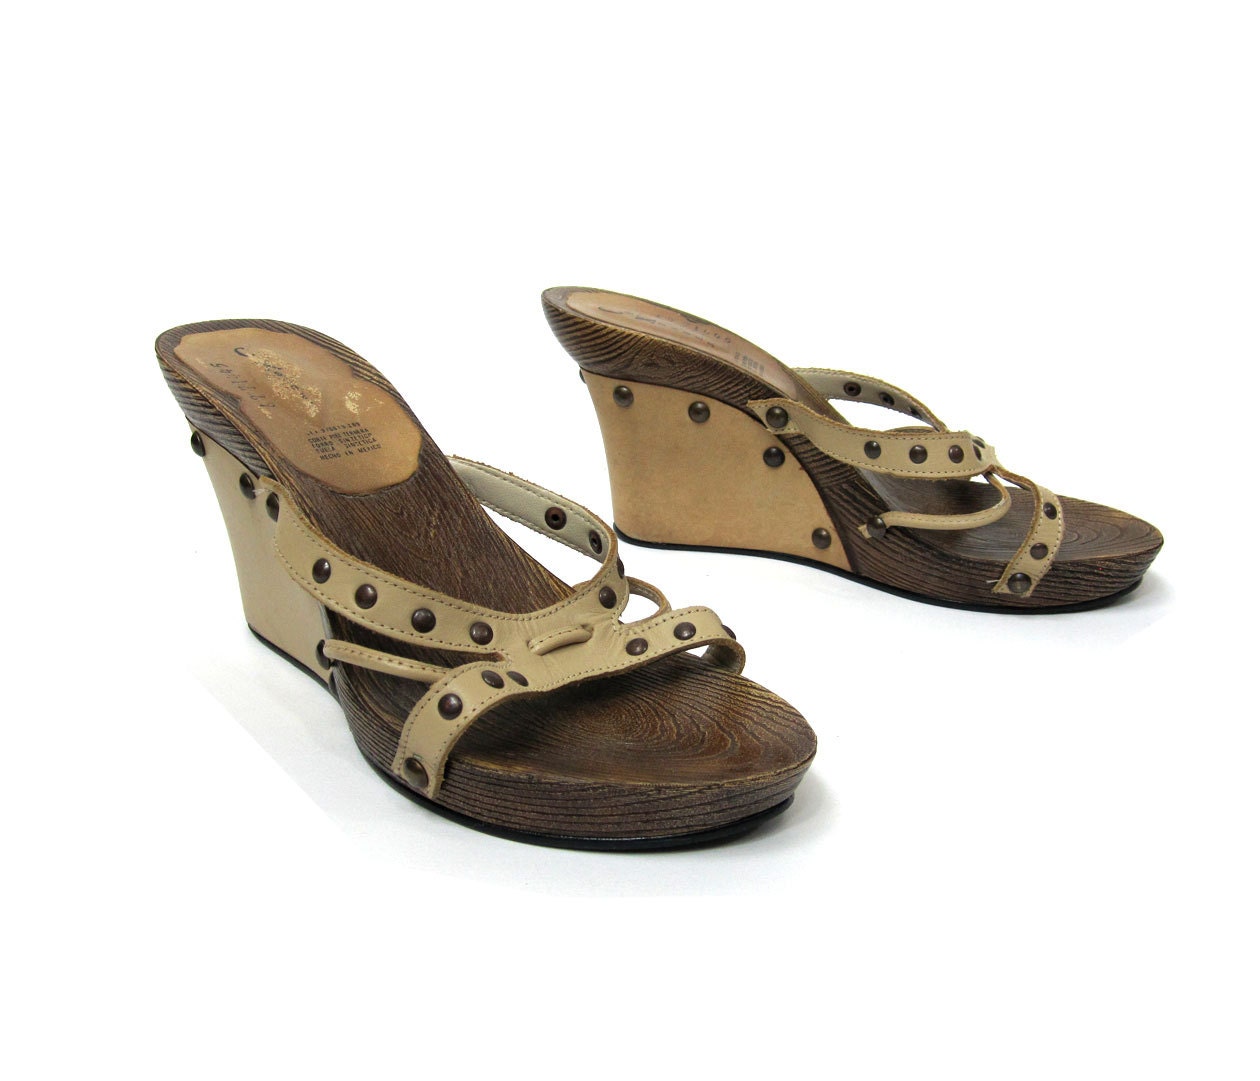 Beige Tan Leather and Wood Heel Wedge Sandals, with Brass Stud Details ...